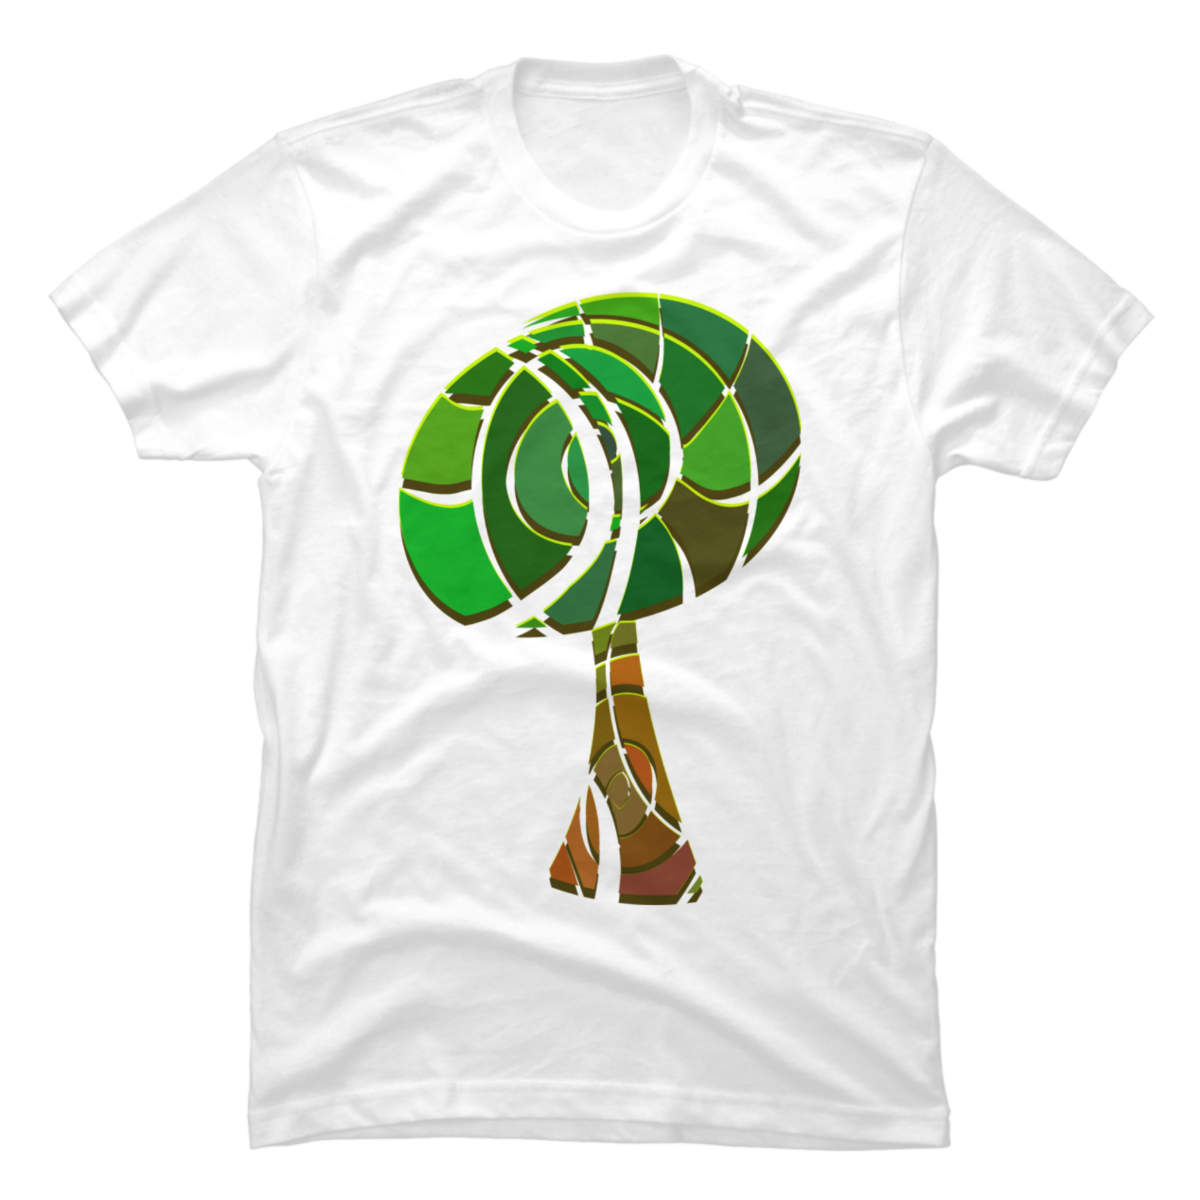 save the forest t shirt